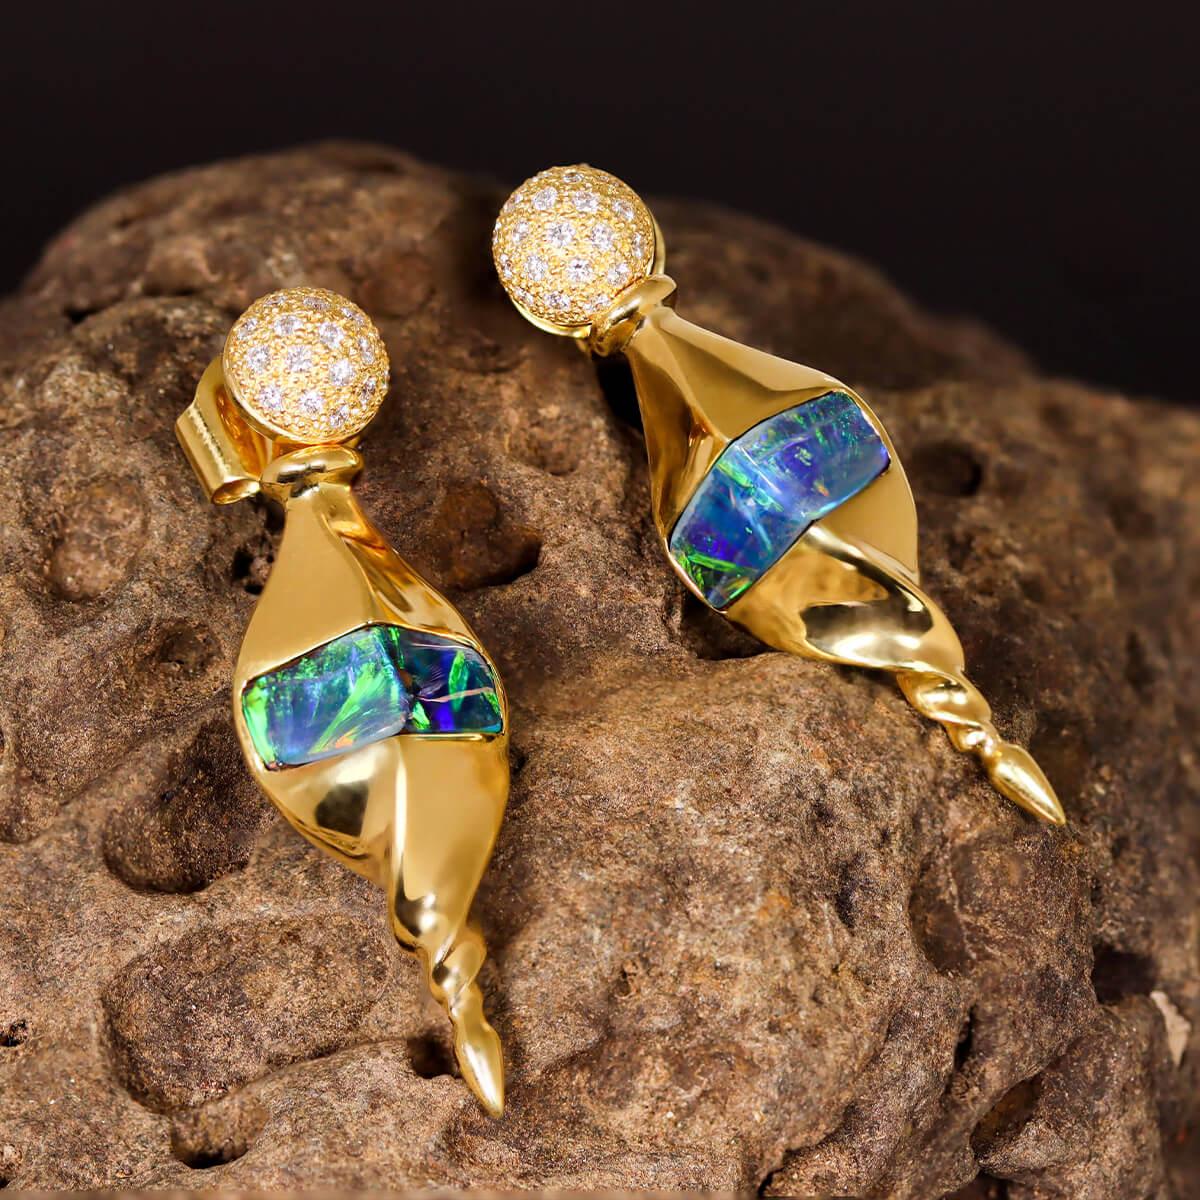 Australian 7.27ct Boulder Opal & 18k Gold Earrings with Detachable Diamond Studs In New Condition For Sale In MAIN BEACH, QLD